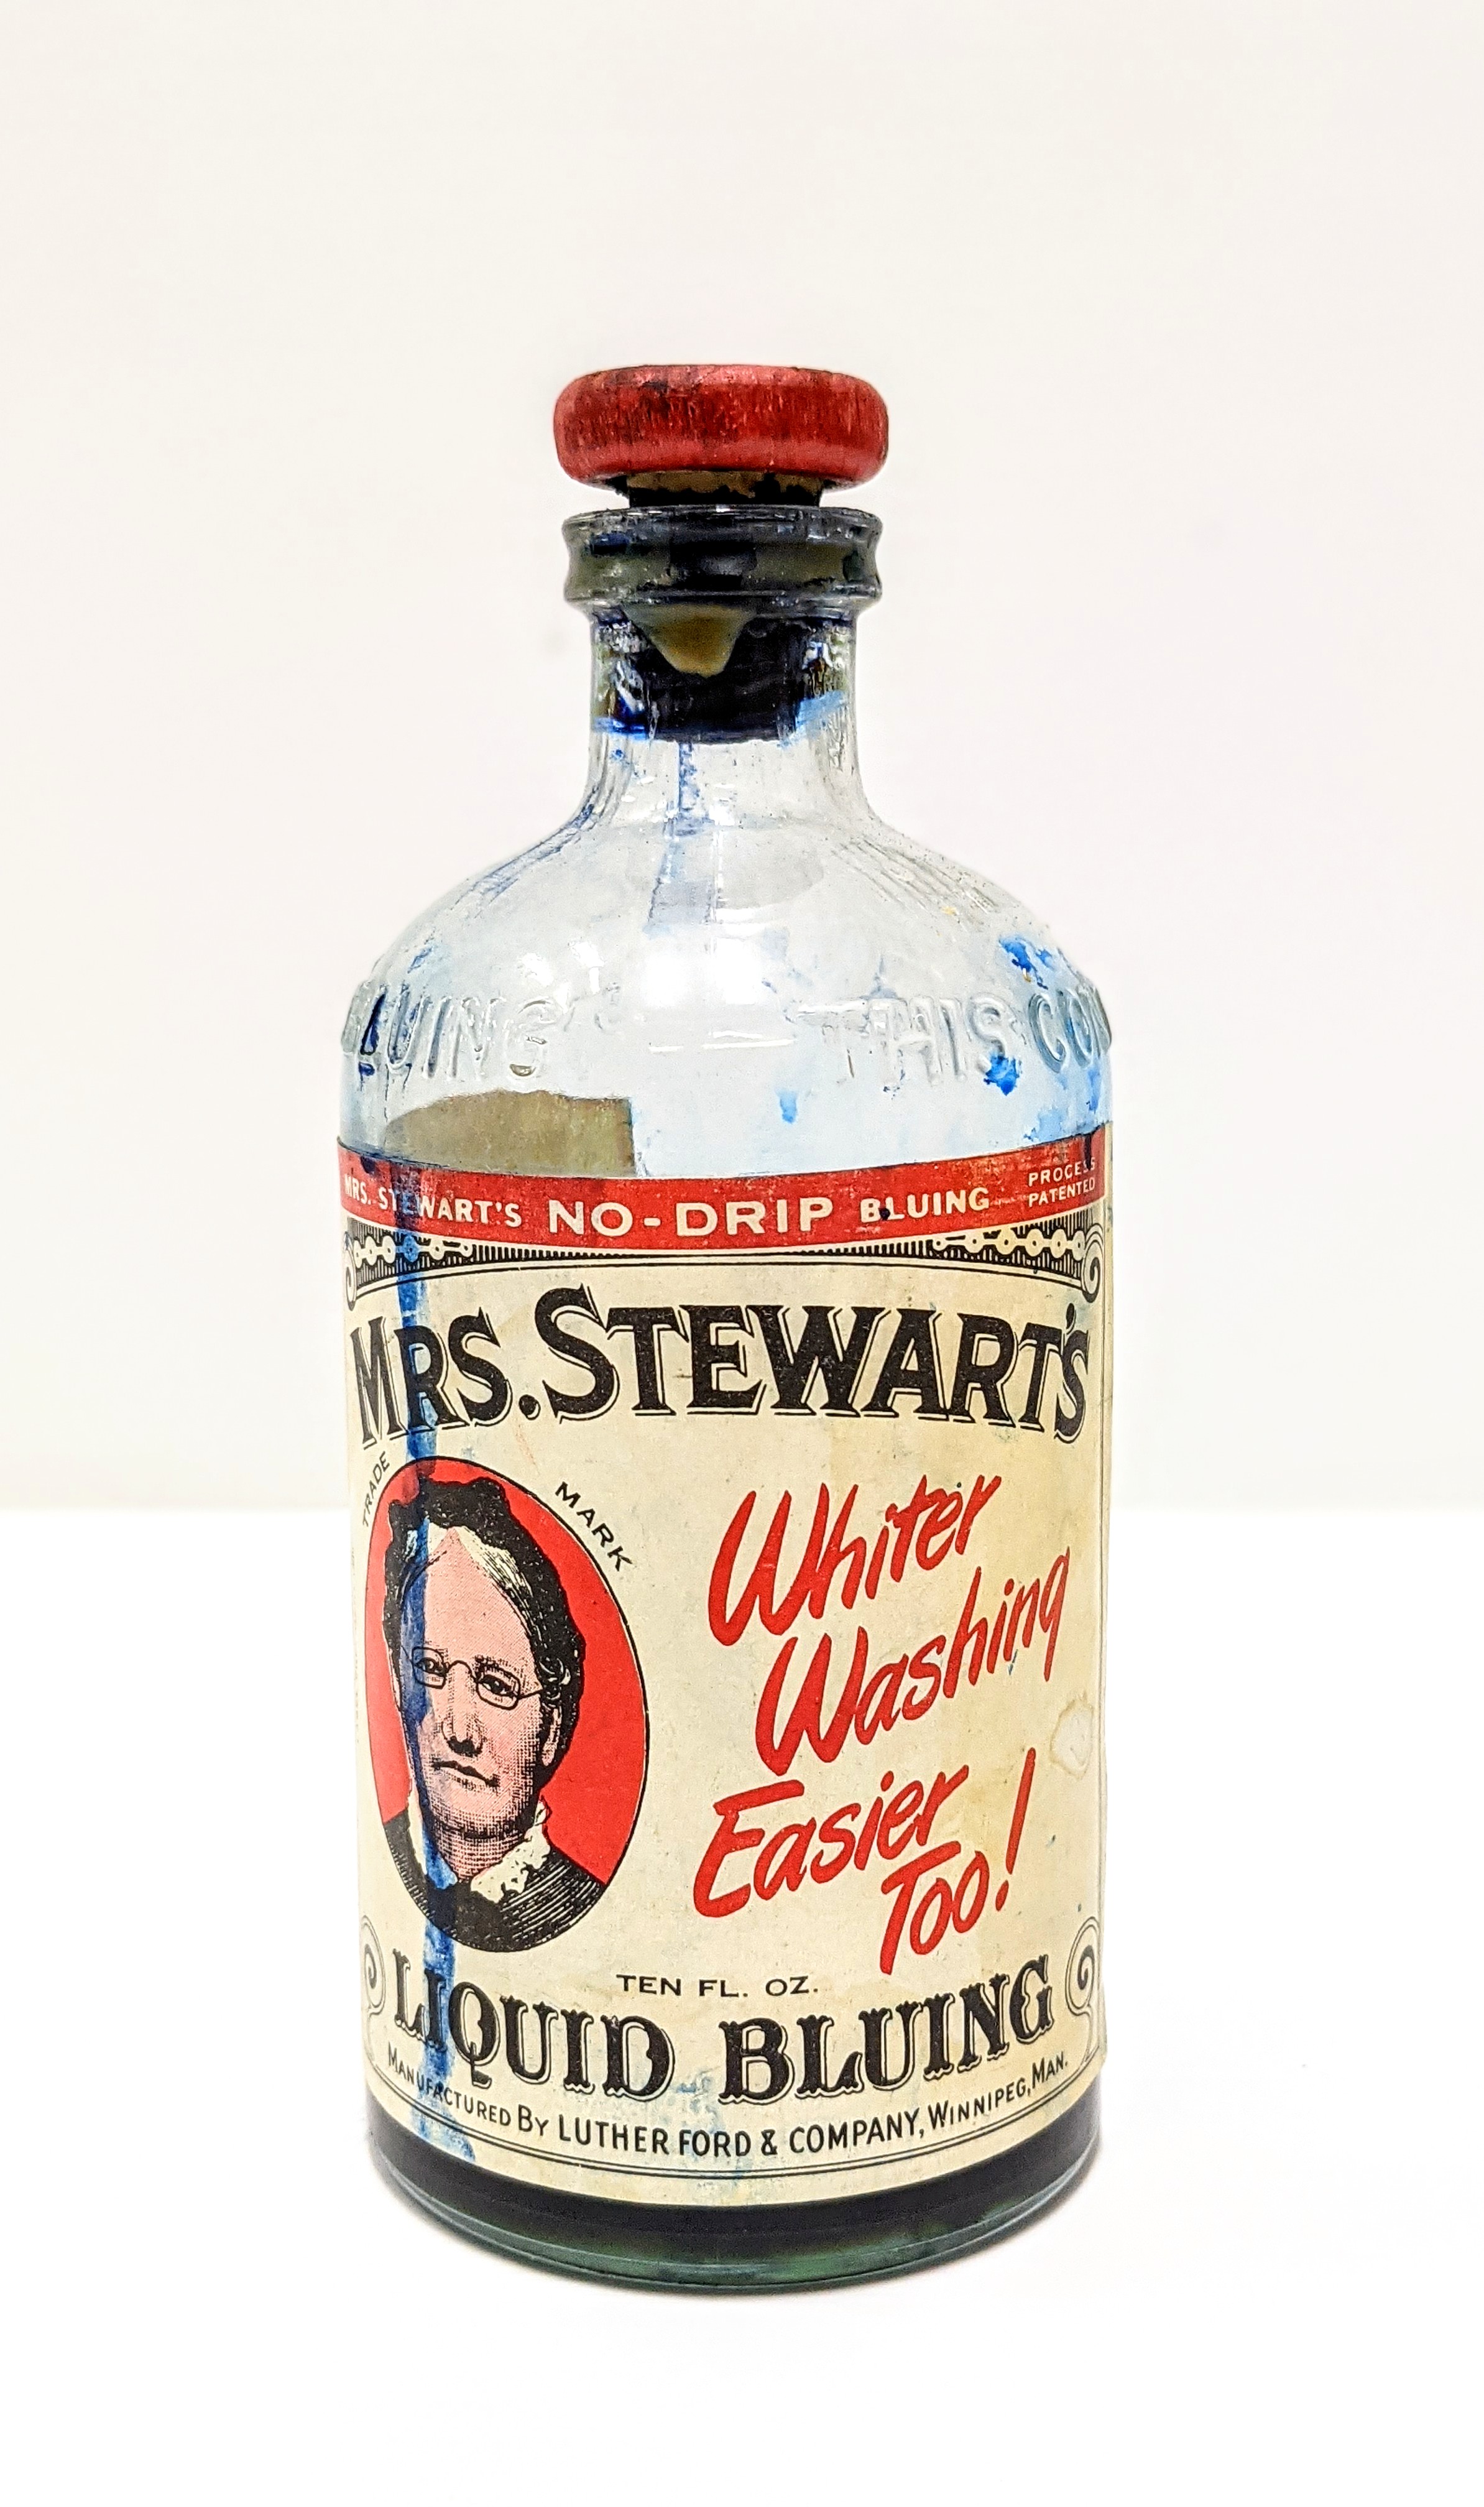 This rich blue liquid was used to help brighten white fabrics from yellow and grey hues brought on by age and repeated washings. The instructions read "Add enough Mrs. Stewart's Bluing to the last rinse to make water light sky-blue". According to color theory, the light-blue water counteracts the warm tones of yellowing fabric- this balances the color at a crisp bright white. The bottle dates back to 1950 and is made at the MSB Winnipeg factory. Mrs. Stewarts Bluing dates back to the 1880's and is still available today.

26/04/2021
998.2.7 / Cranna Toews, Marilee